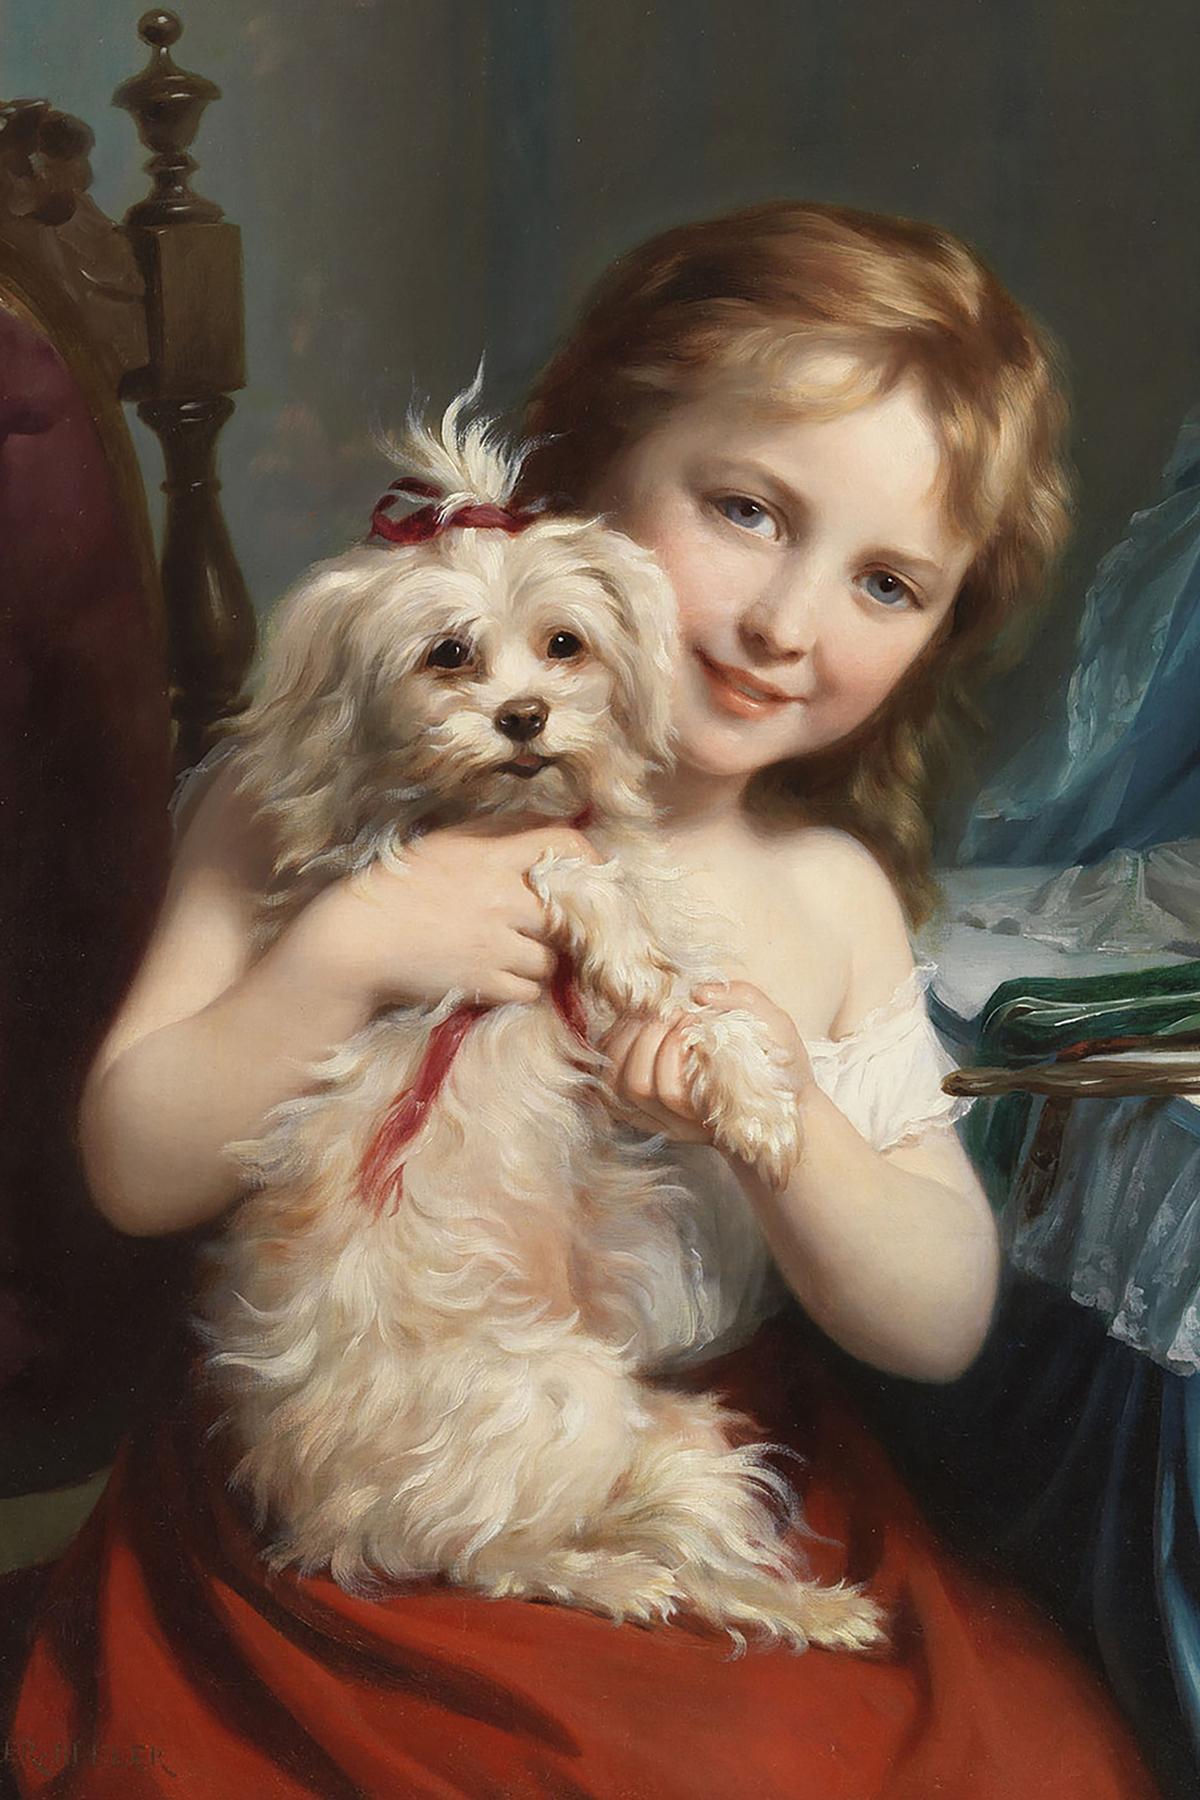 Fritz Zuber-Bühler was born in 1822 in Le Locle, Switzerland, but moved to Paris at the age of sixteen to begin his training with Louis Grosclaude. He entered the Ecole des Beaux-Arts and then the atelier of François-Edouard Picot. Picot also taught